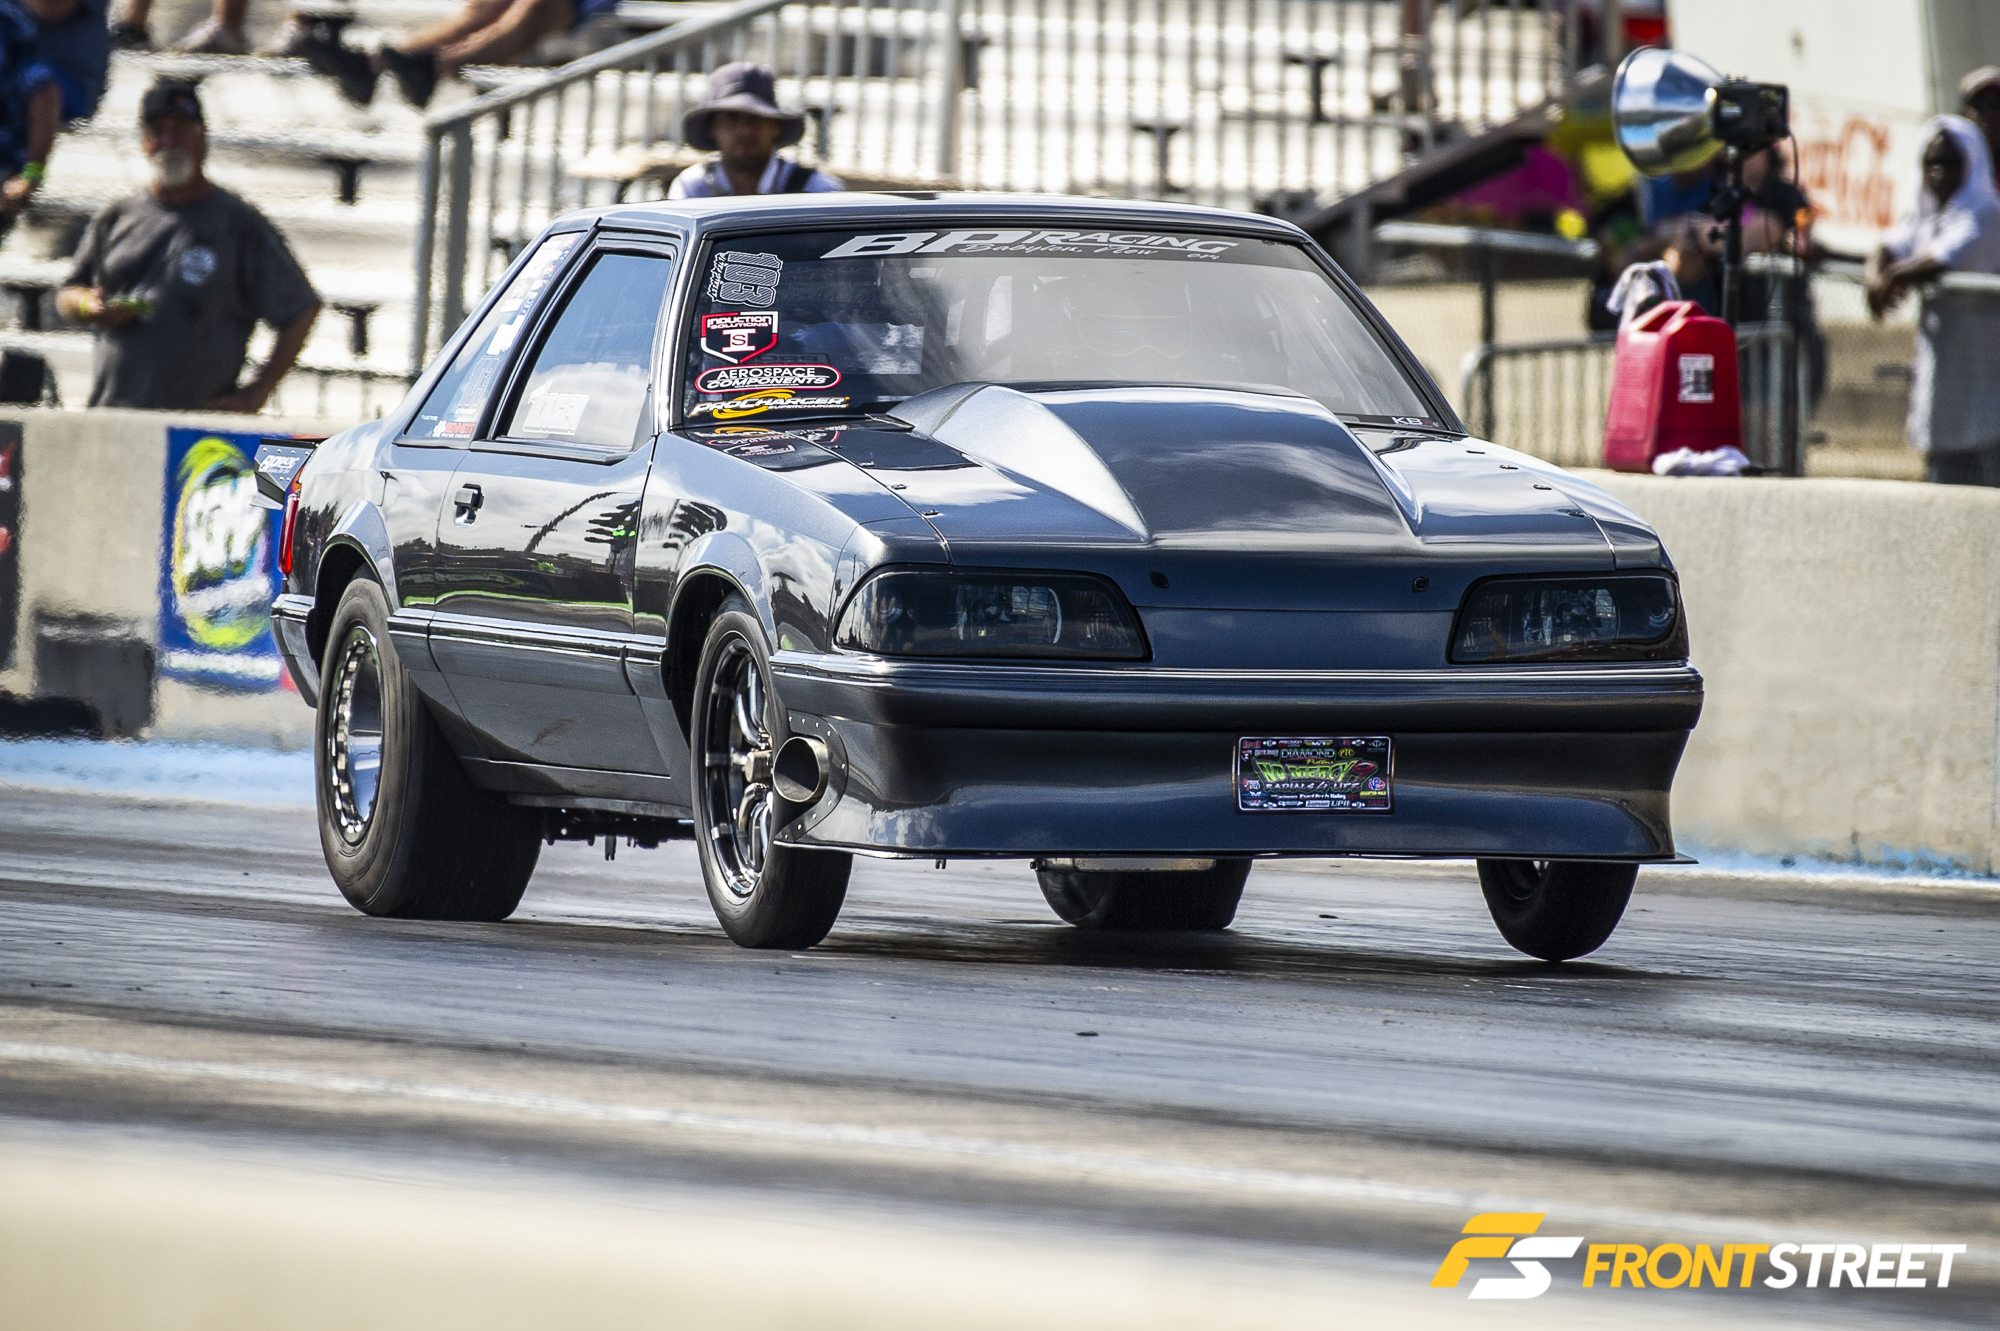 Filling The Void: Rodney Ragen’s Ultra Street Rocket Runs Over The Competition